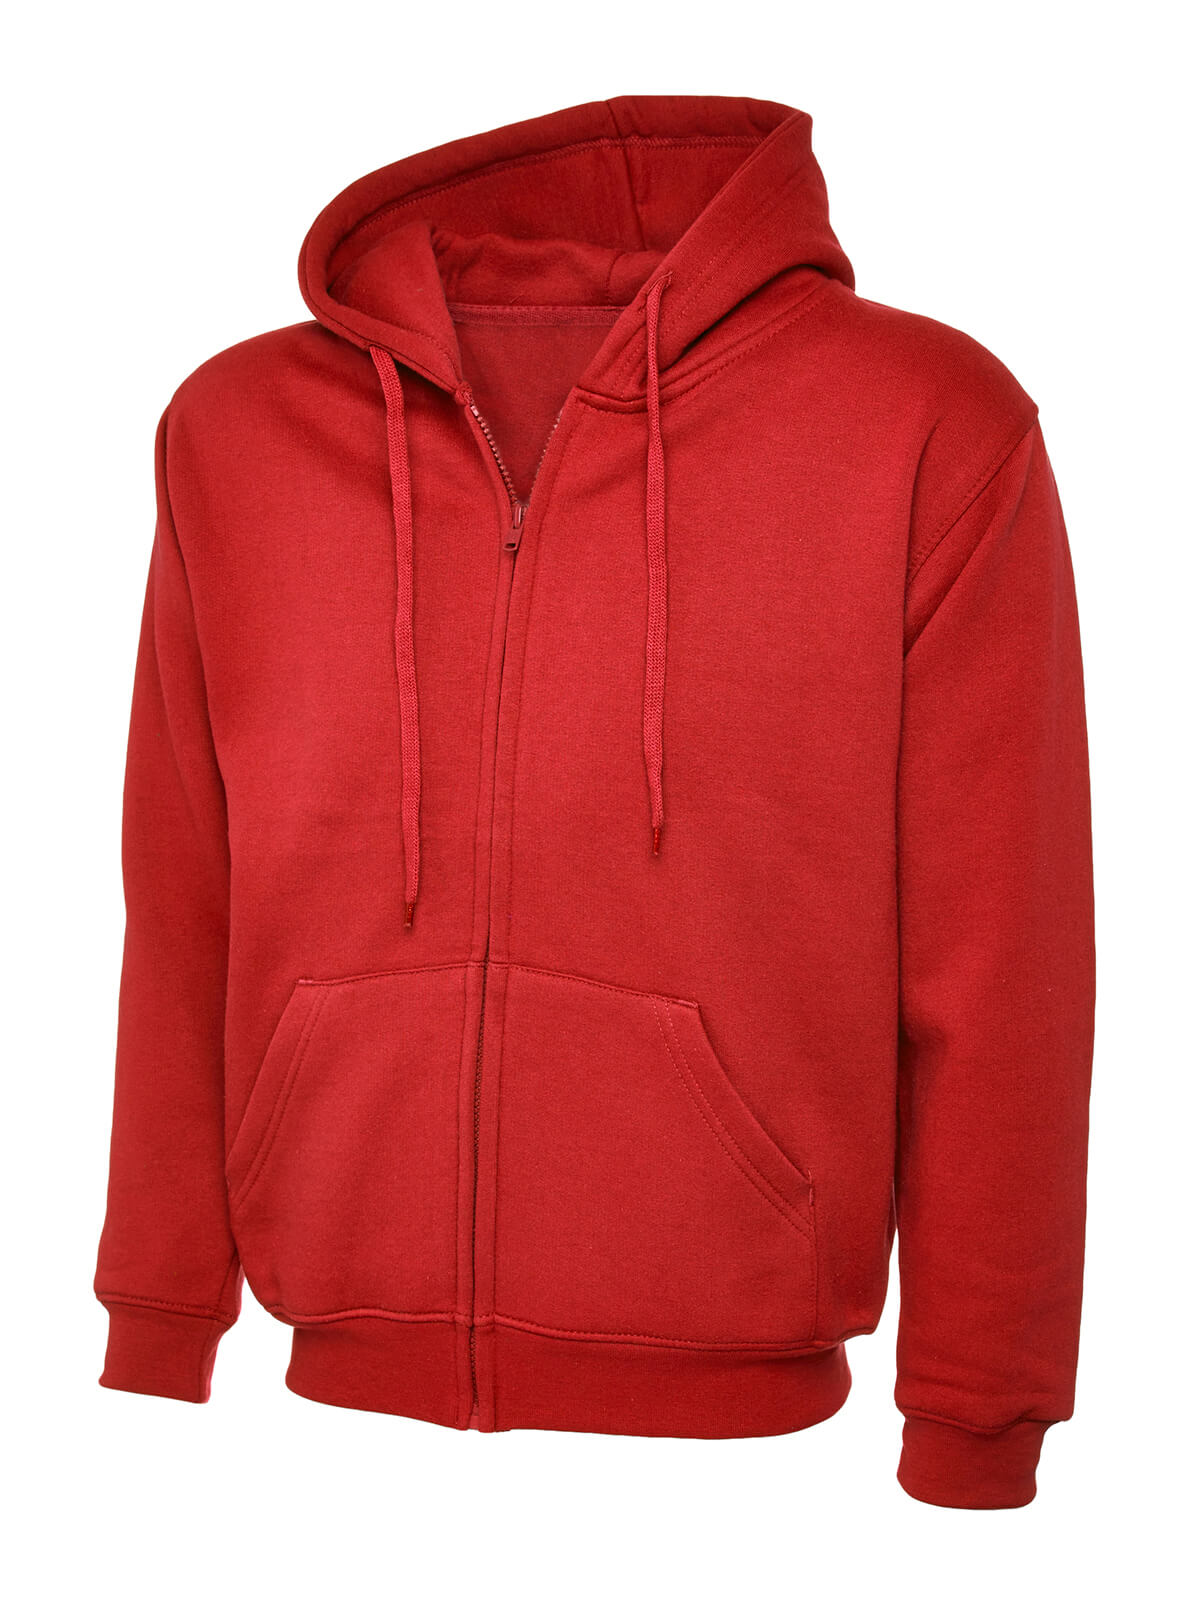 red hooded jumper